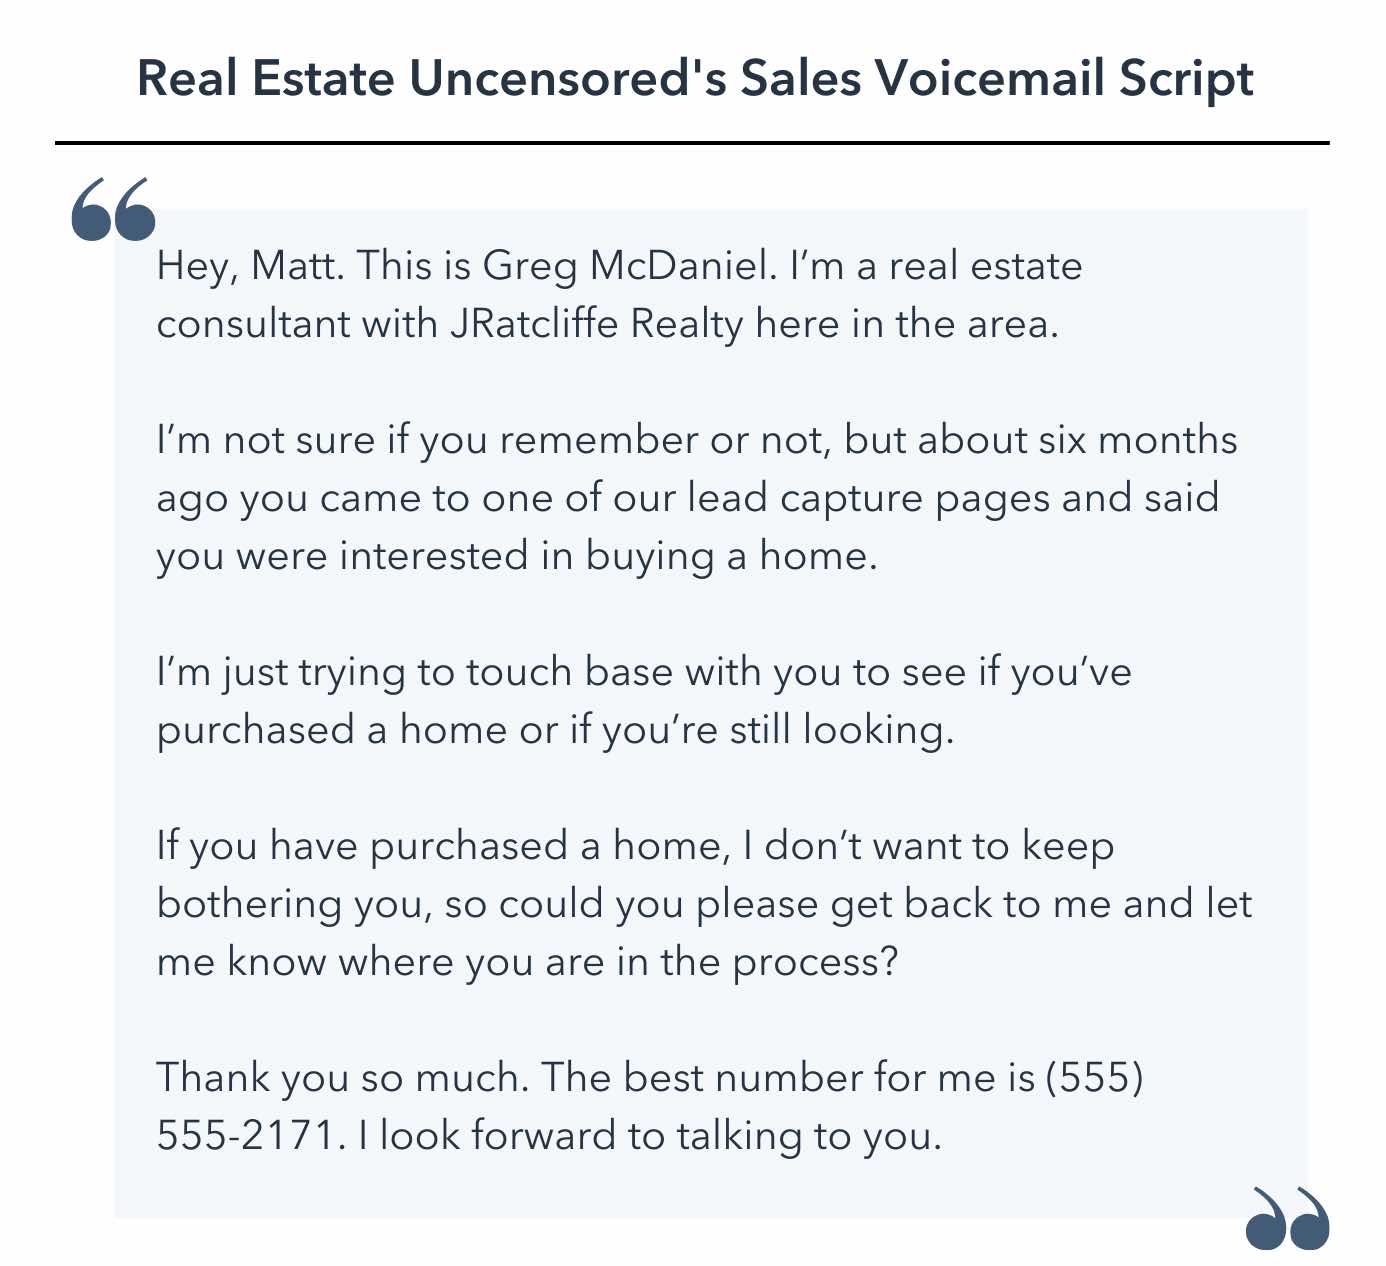 sales voicemail script template, Hey, Matt. This is Greg McDaniel. I’m a real estate consultant with JRatcliffe Realty here in the area.I’m not sure if you remember or not, but about six months ago you came to one of our lead capture pages and said you were interested in buying a home. I’m just trying to touch base with you to see if you’ve purchased a home or if you’re still looking. If you have purchased a home, I don’t want to keep bothering you, so could you please get back to me and let me know where you are in the process? Thank you so much. The best number for me is (555) 555-2171. I look forward to talking to you.